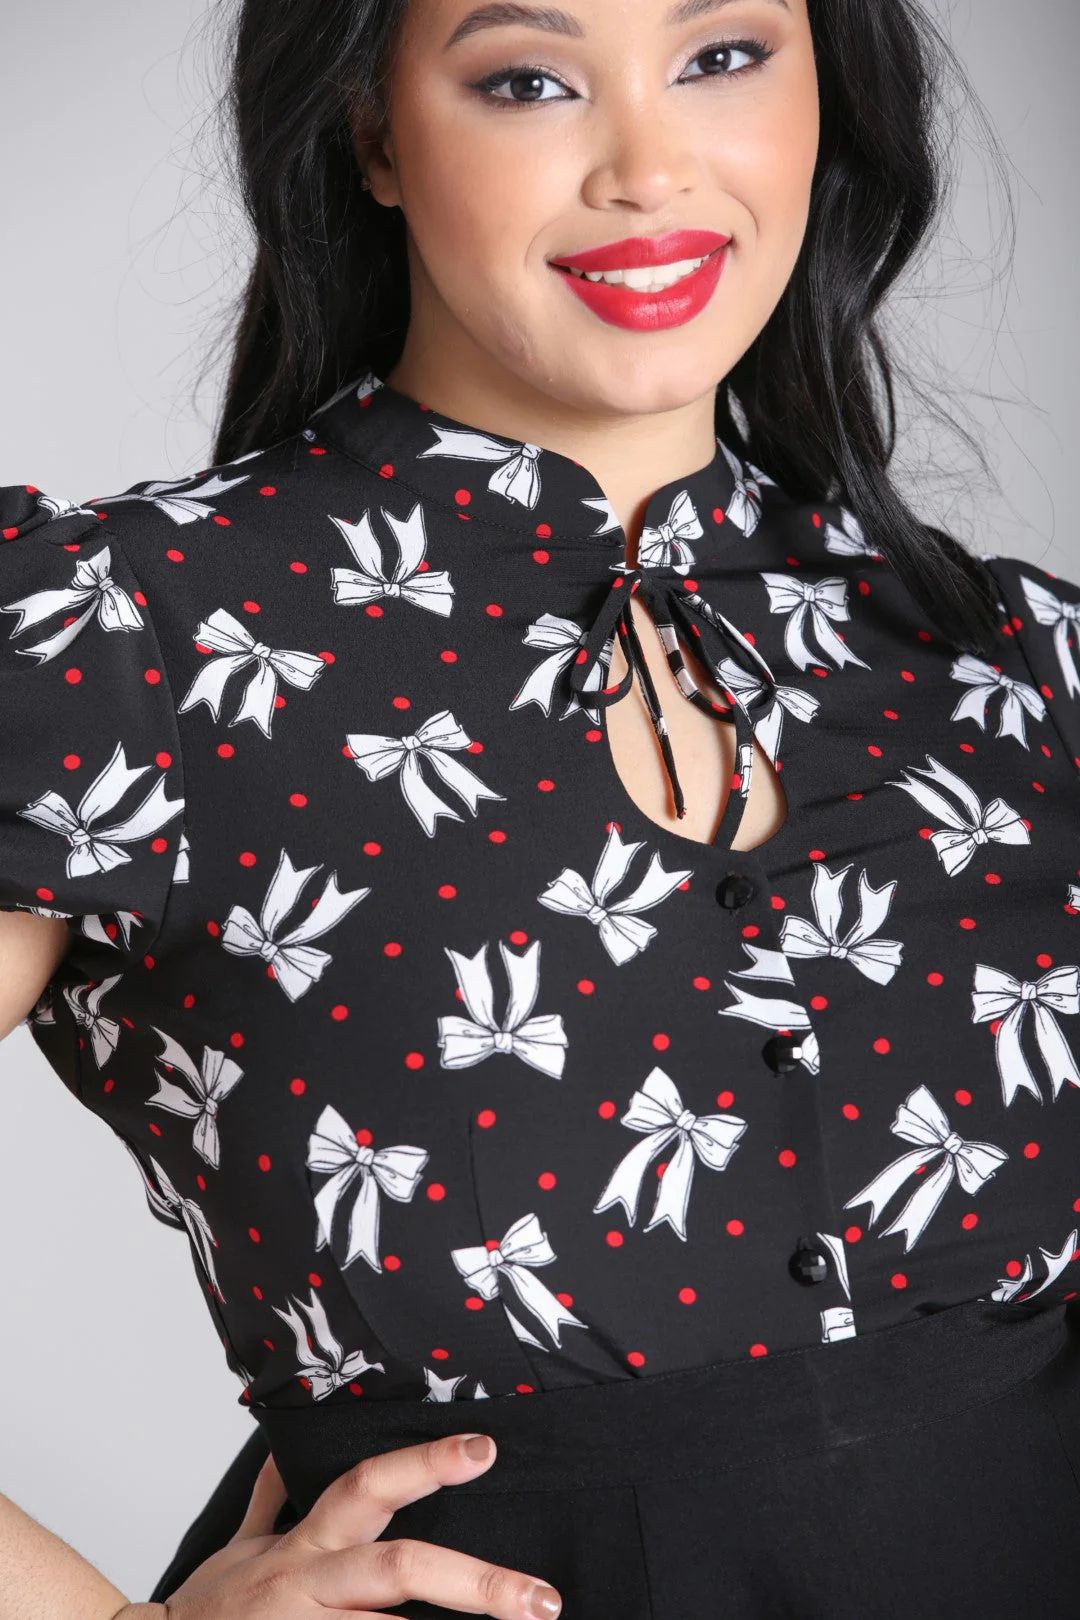 PS60270bbbbb-chemisier-blouse-pin-up-rockabilly-50-s-retro-hell-bunny-bobbie